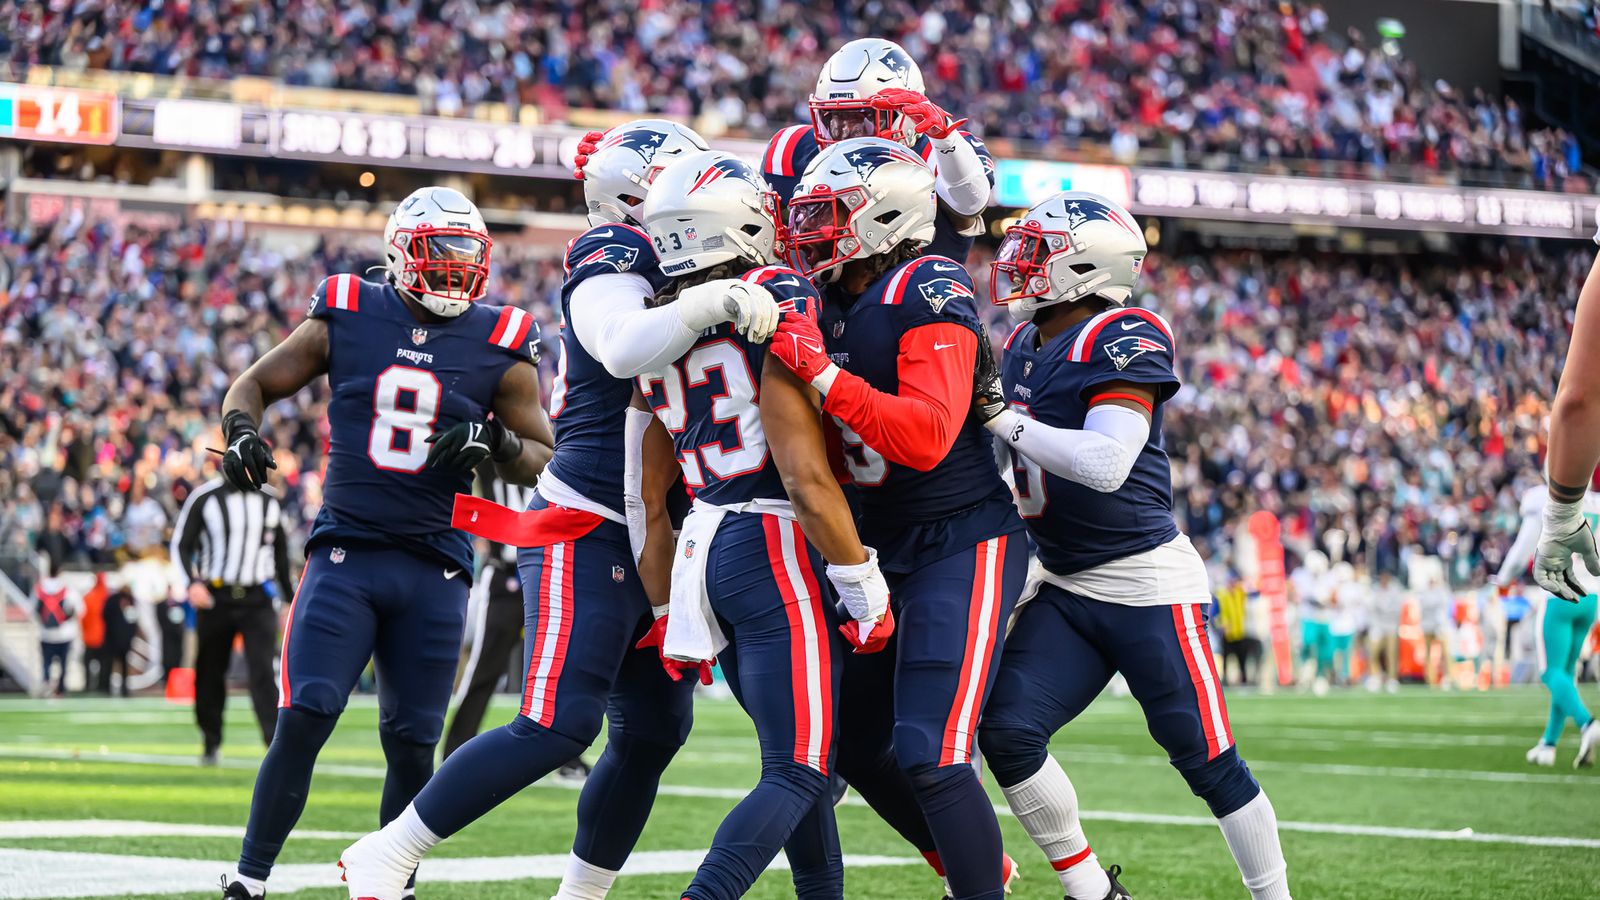 Patriots 23, Dolphins 21: New England keeps its NFL playoff hopes alive